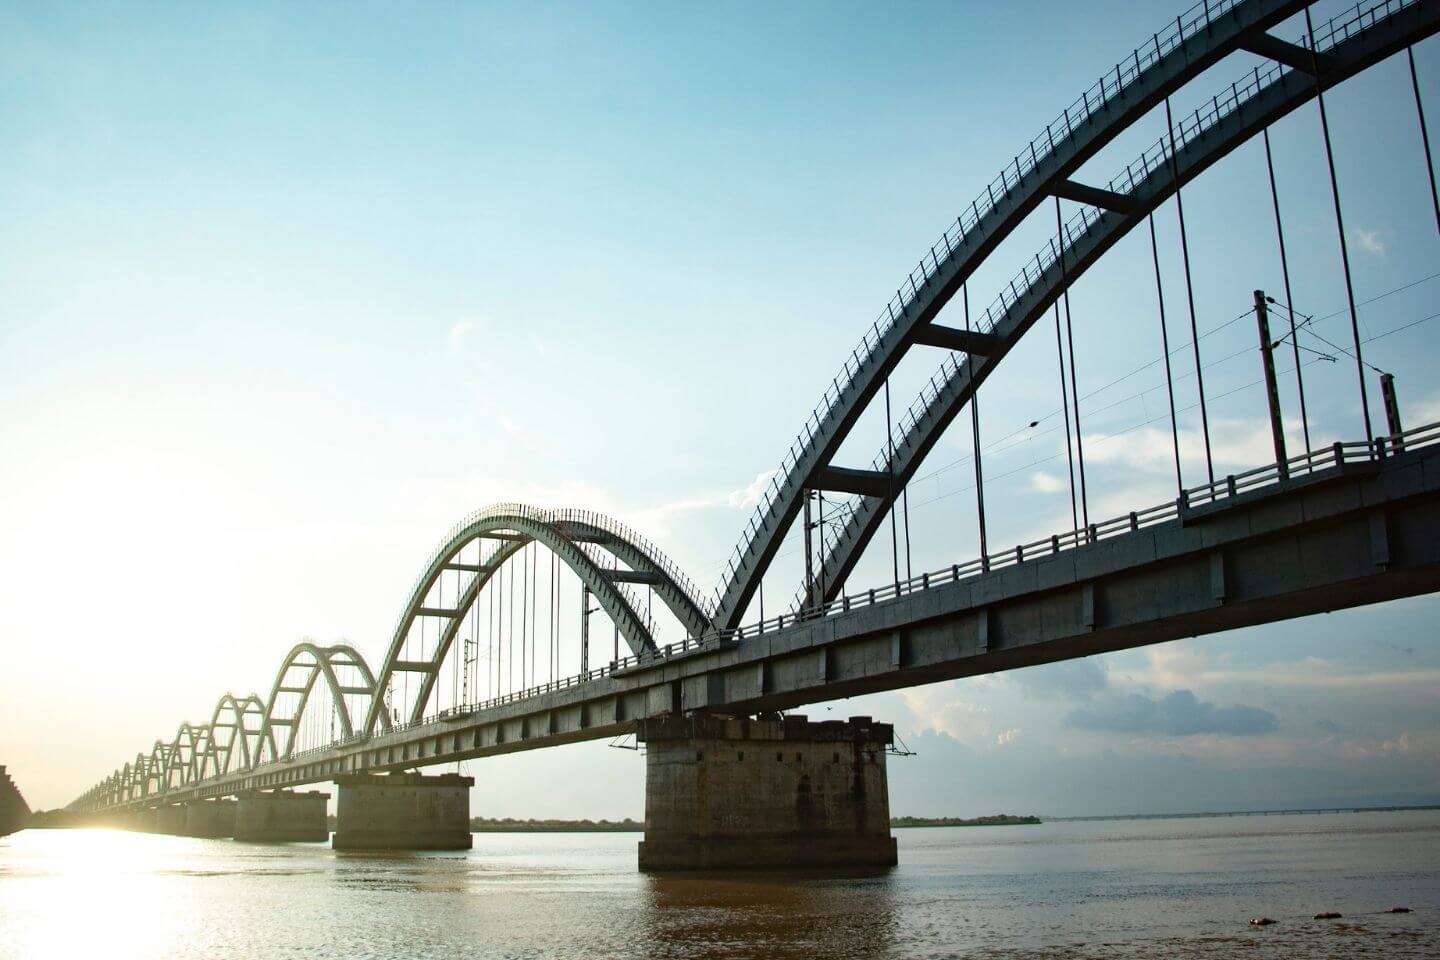 Rajahmundry is among the most preferred places to see near Hyderabad within 500 km